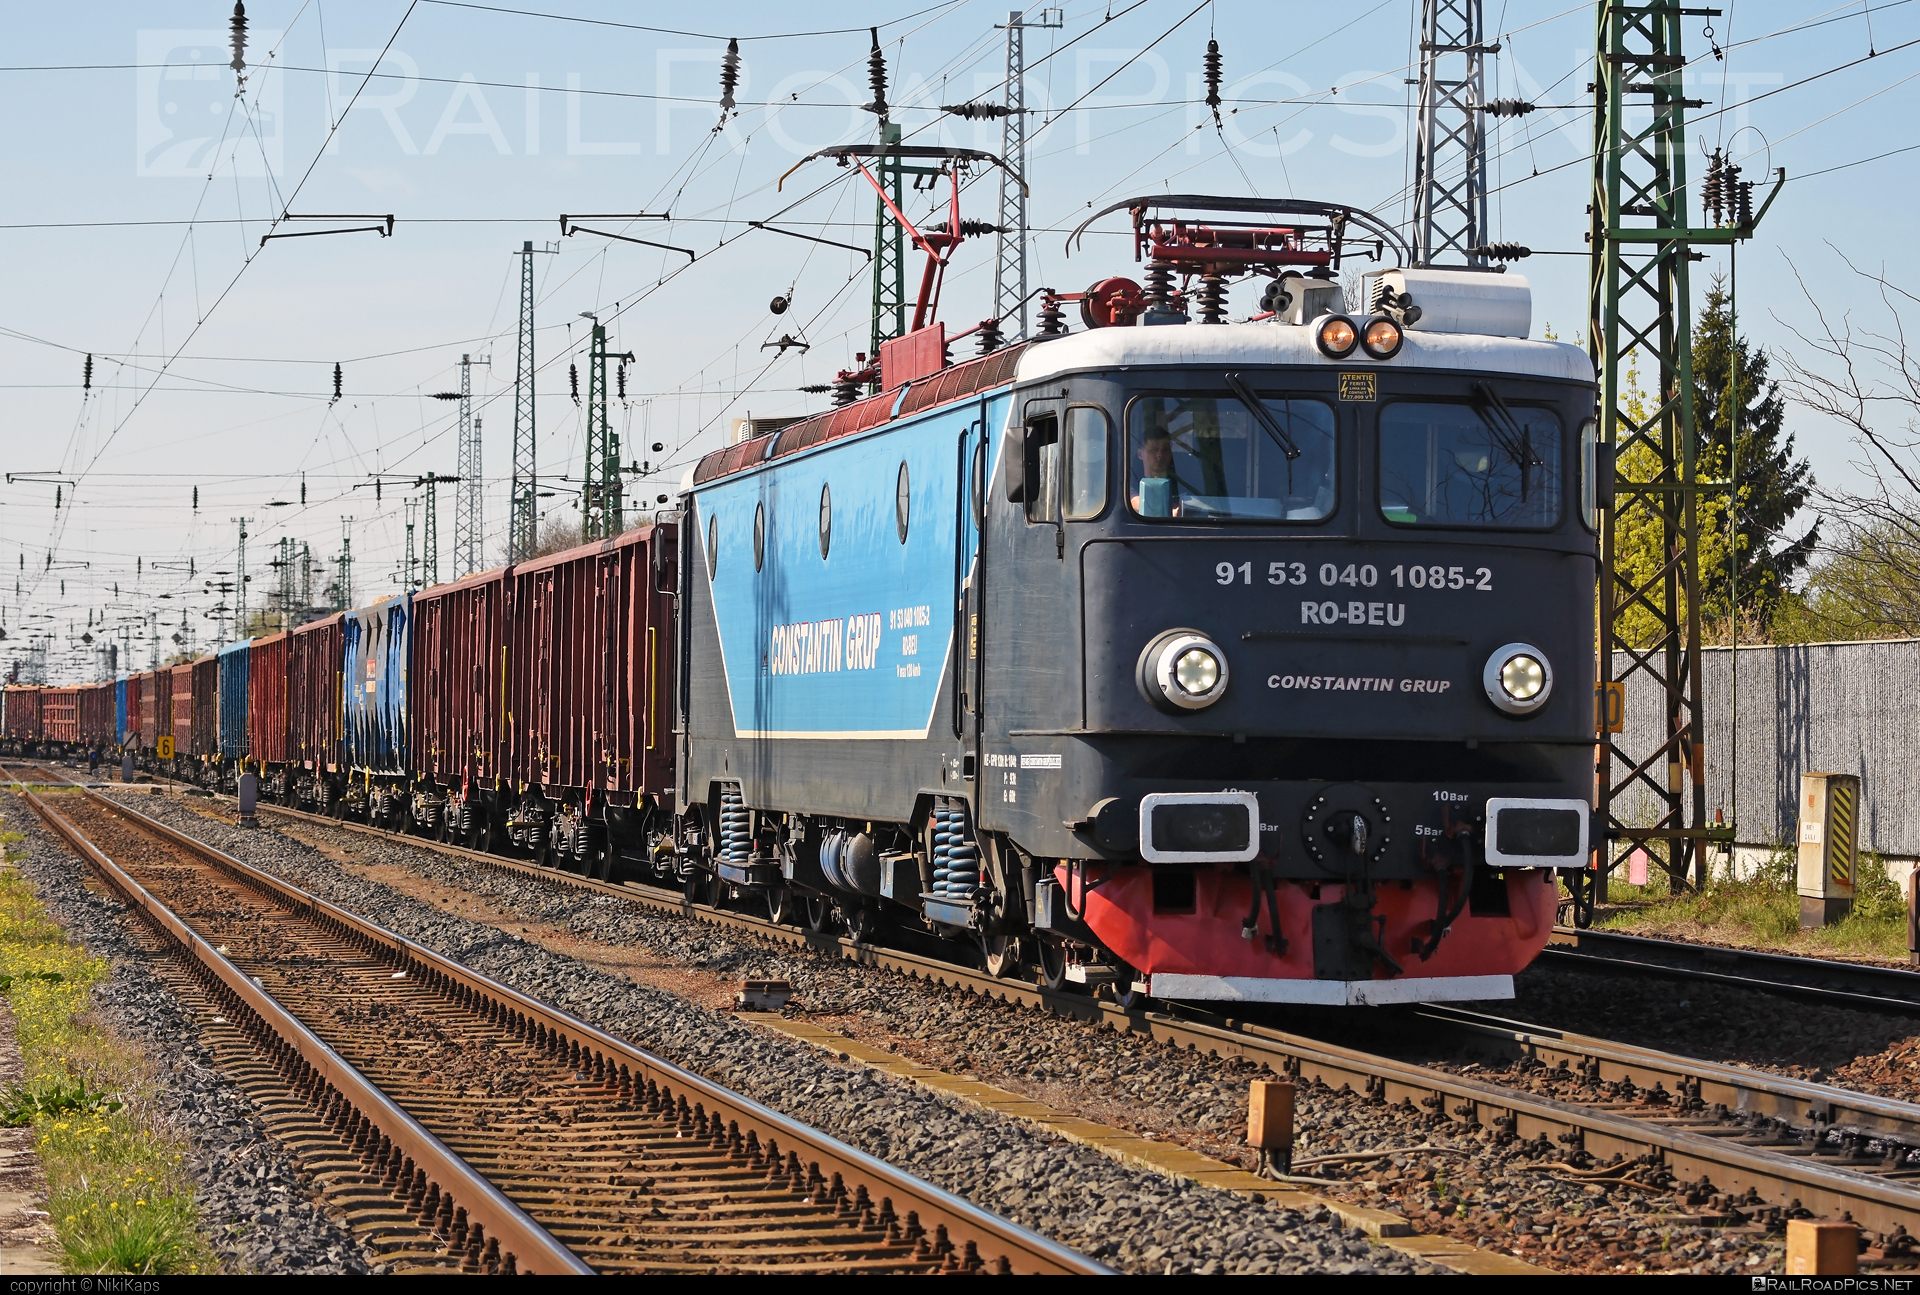 Electroputere LE 5100 - 040 1085-2 operated by SC CONSTANTIN GRUP #constantingrup #electroputere #electroputerecraiova #electroputerele5100 #le5100 #openwagon #scConstantinGrup